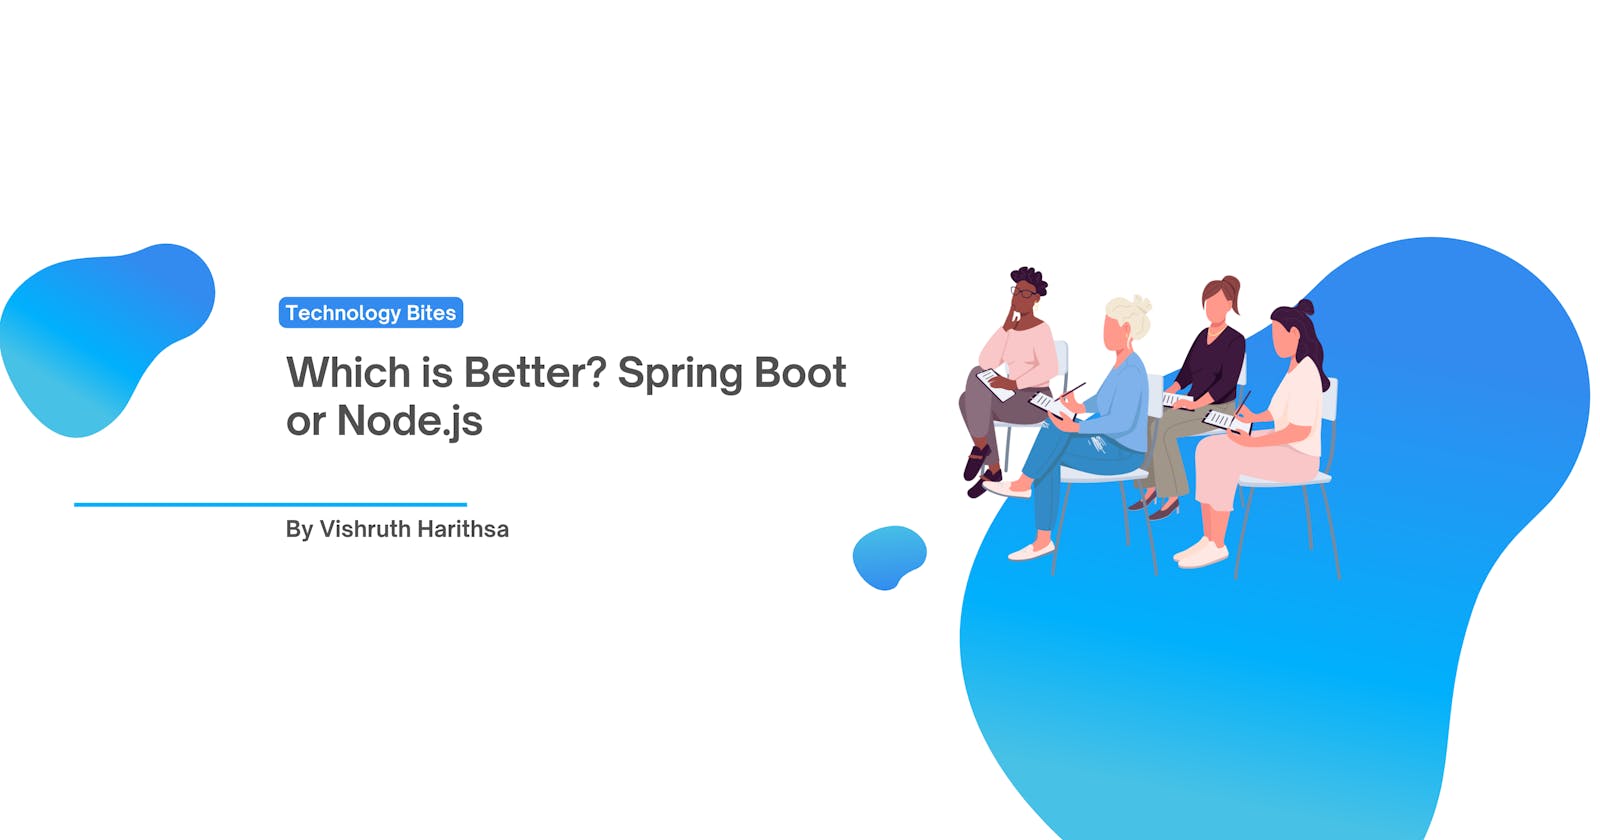 Which is Better? Spring Boot or Node.js